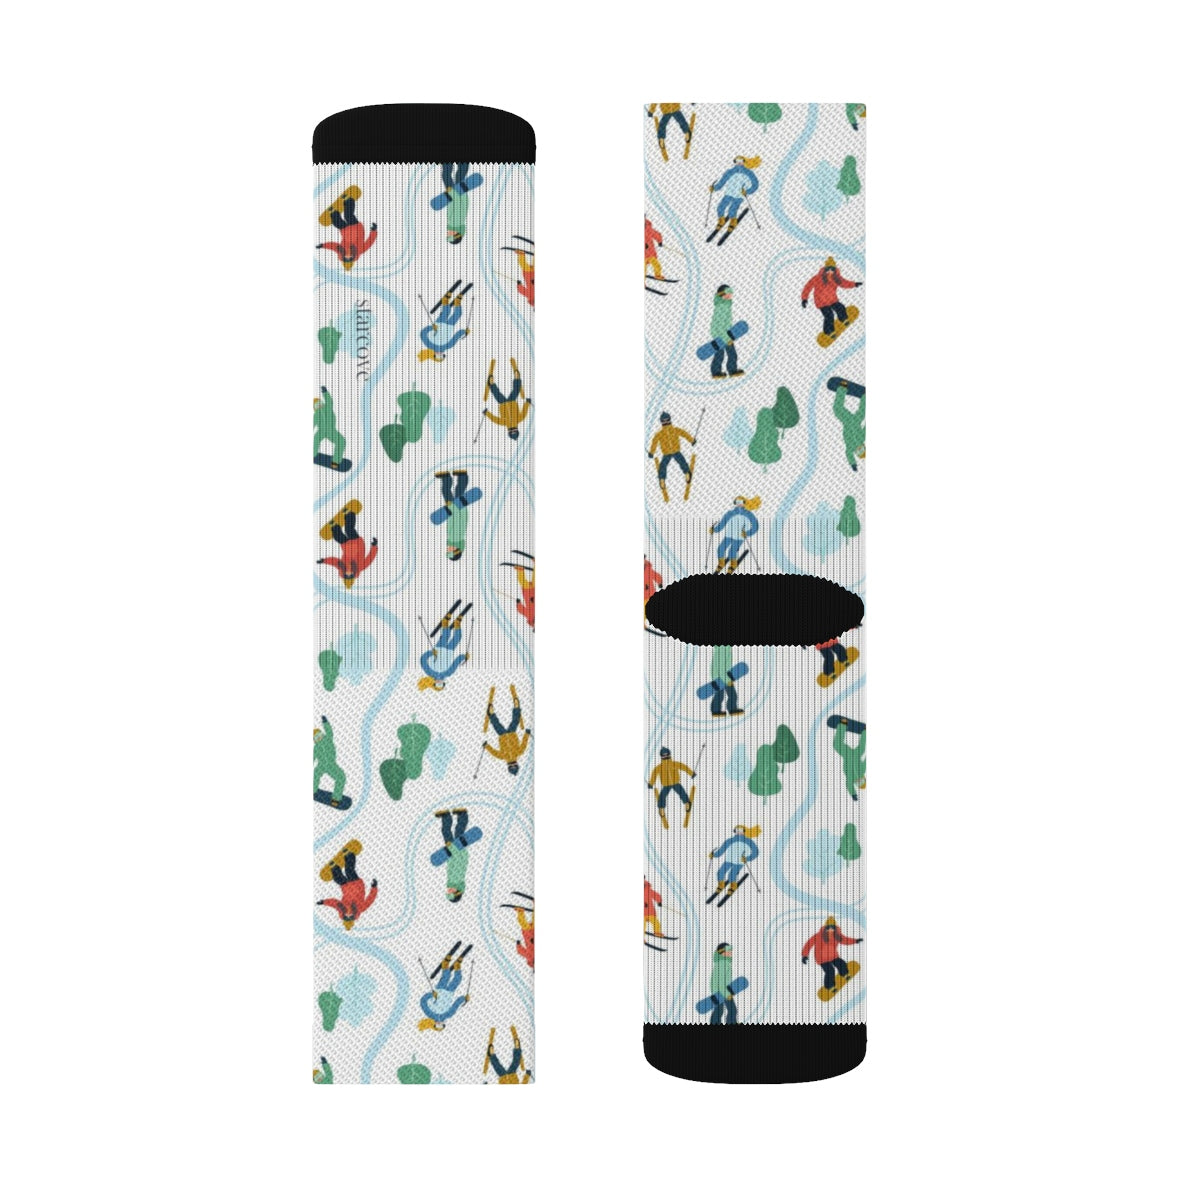 Ski Snowboarding Print Socks, Skiing Mountain 3D Sublimation Socks Women Men Funny Fun Novelty Cool Funky Crazy Casual Cute Unique Gift Starcove Fashion